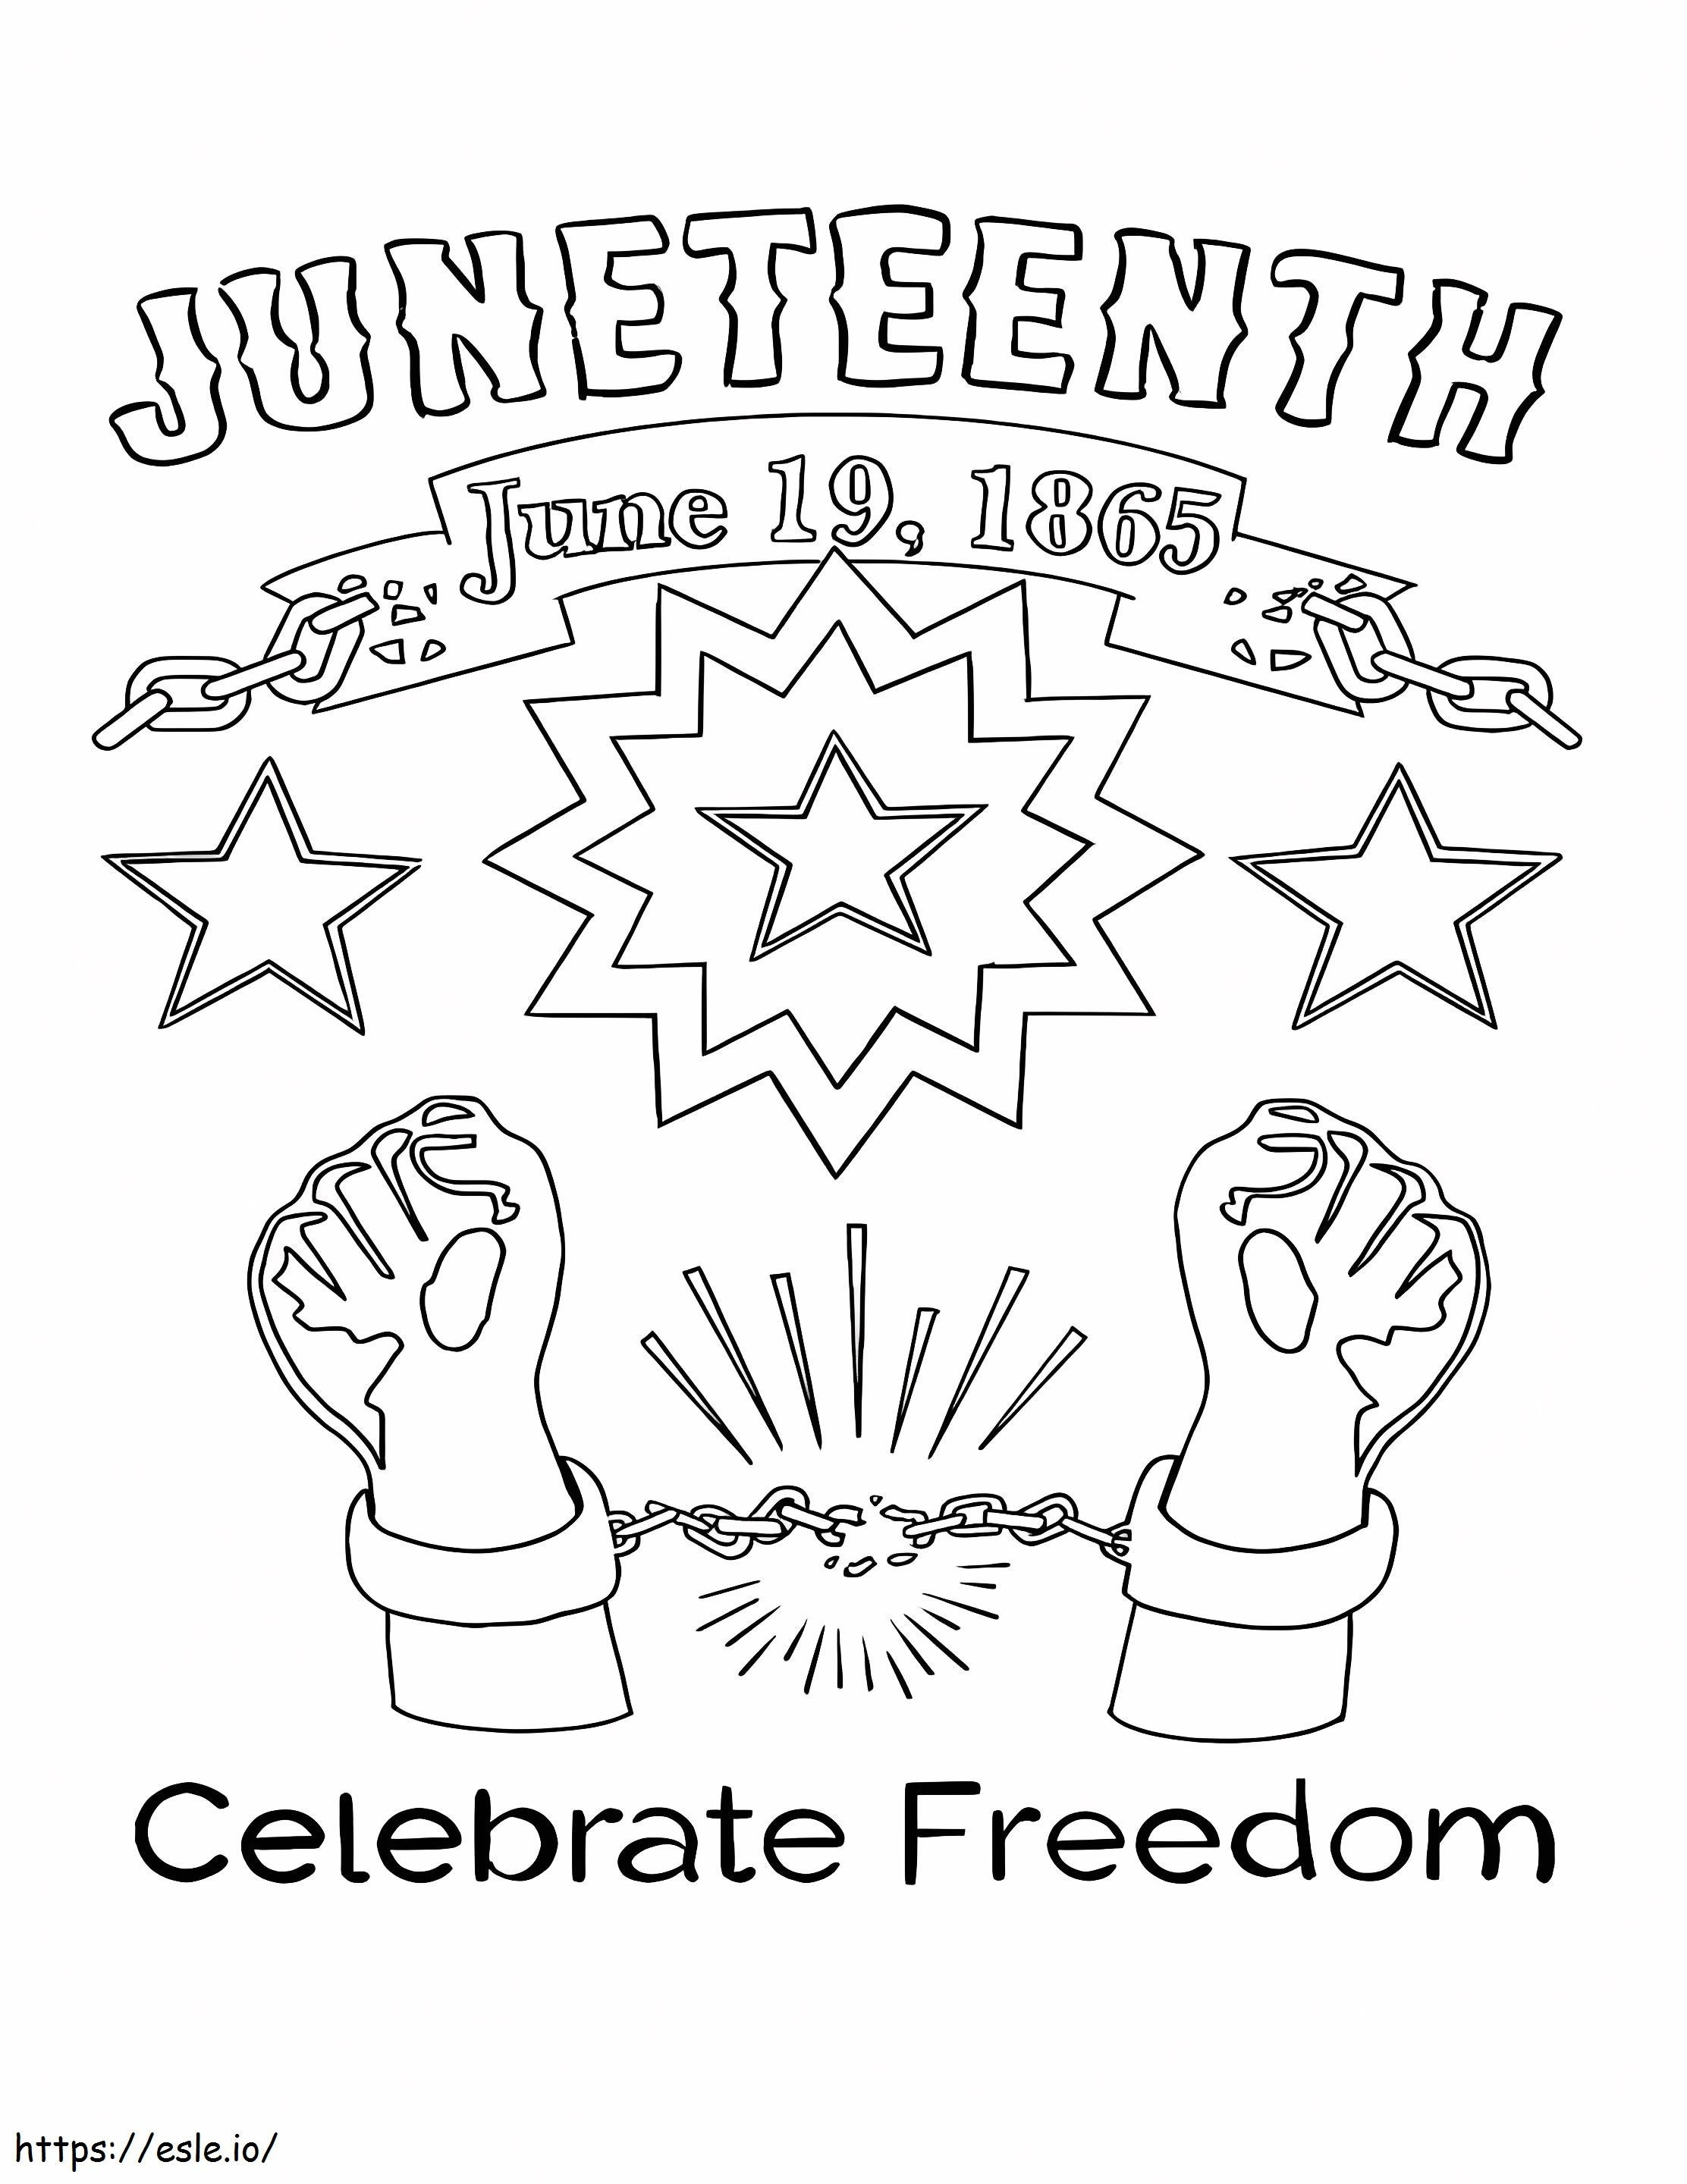 Juneteenth Day coloring page